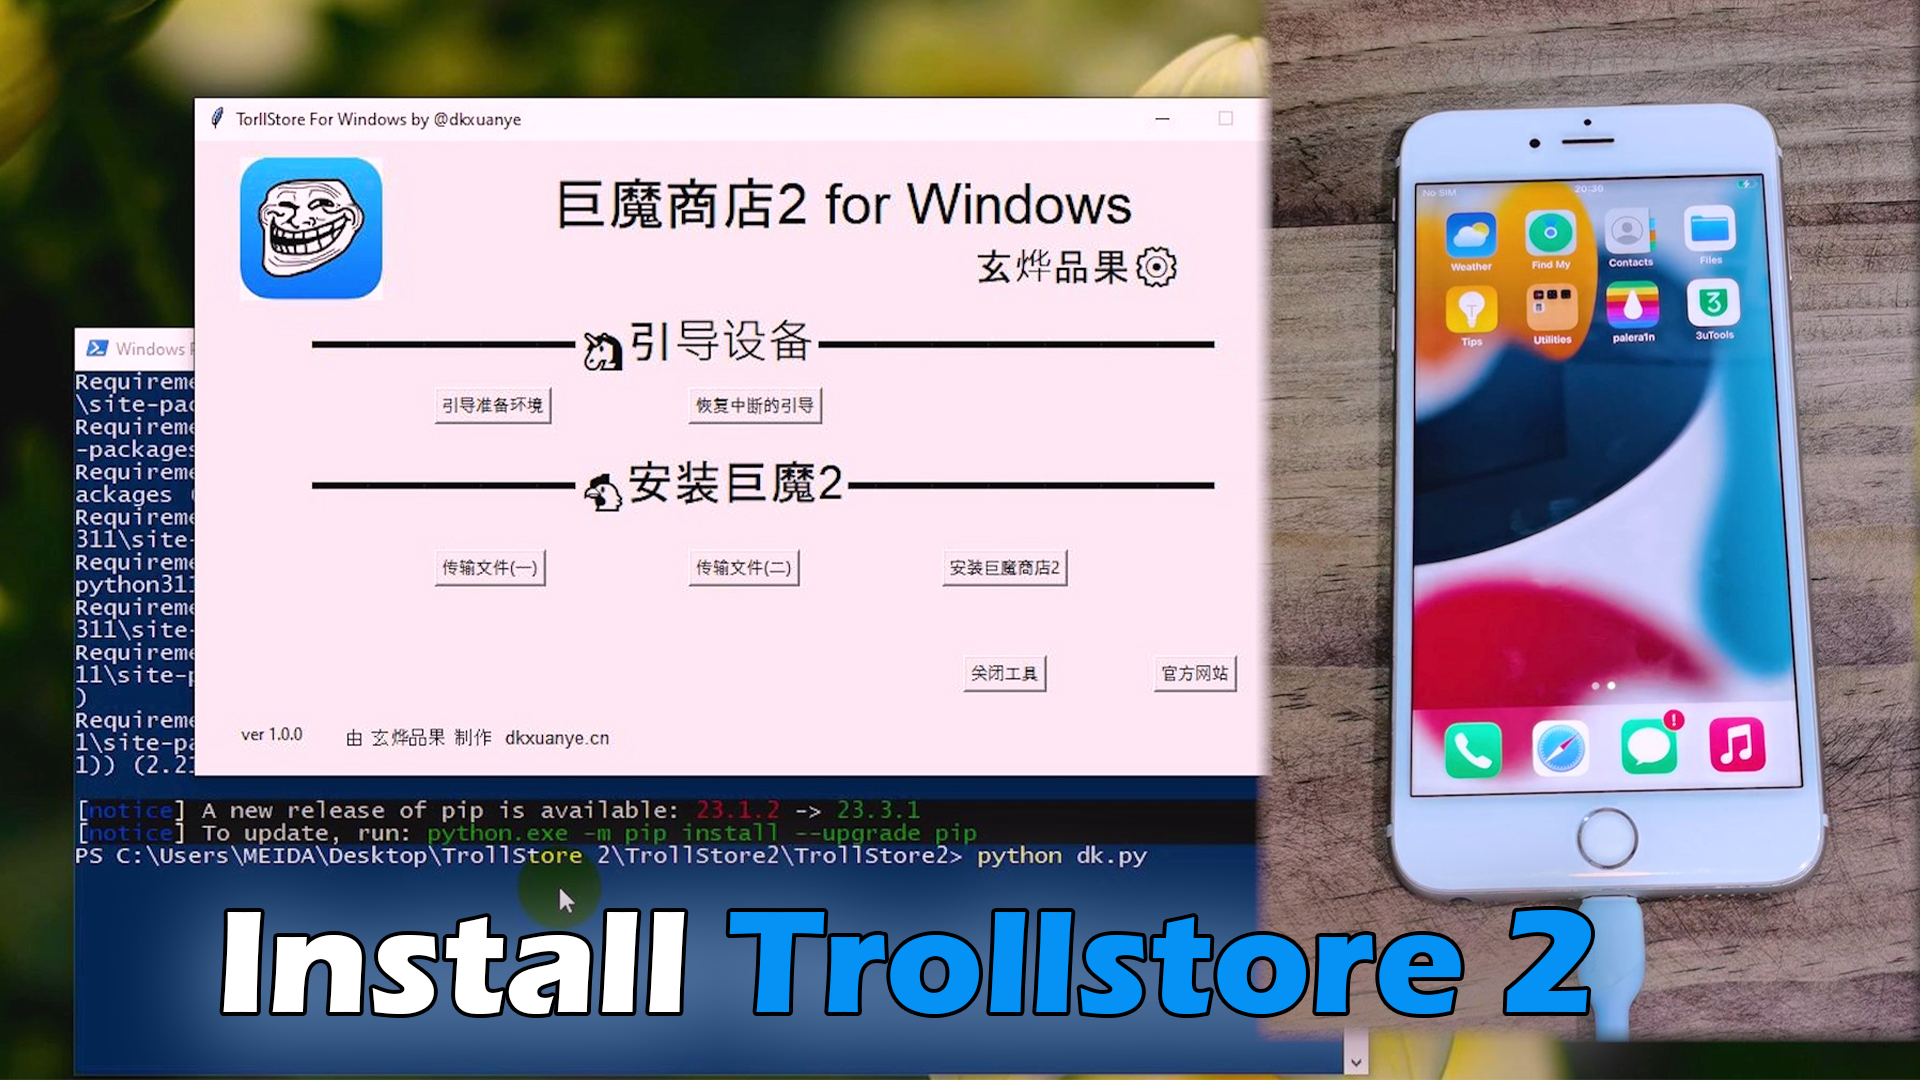 Trollstore iOS 17 - What Is Trollstore and How Does It Work